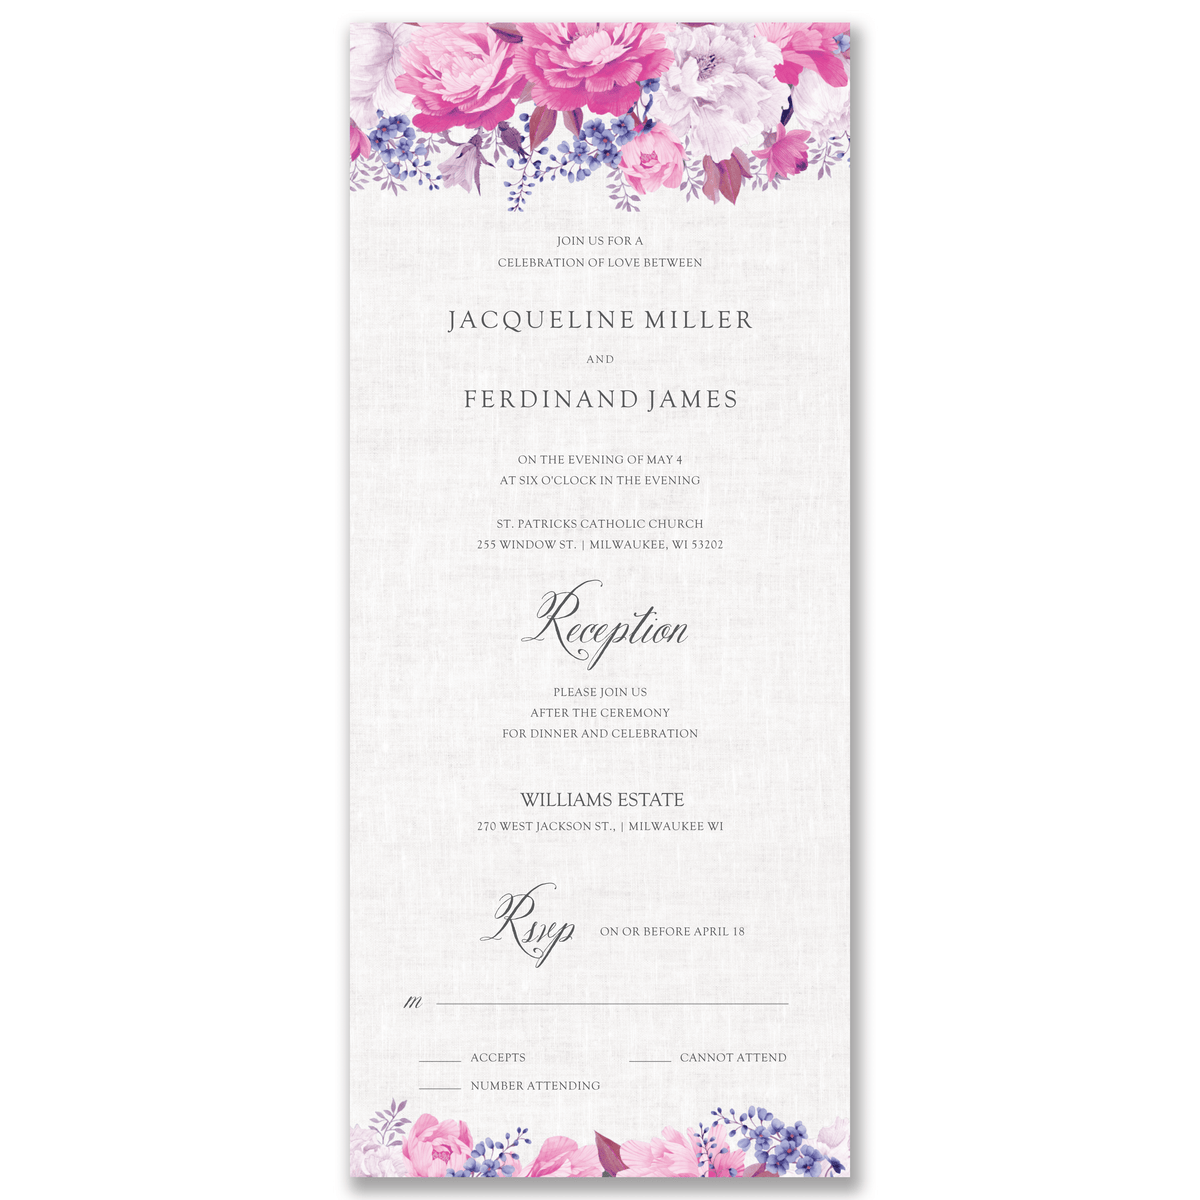 Enchanting Blossoms All-in-One Wedding Invitation Gartner Studios All-in-One Wedding Invitation 98524